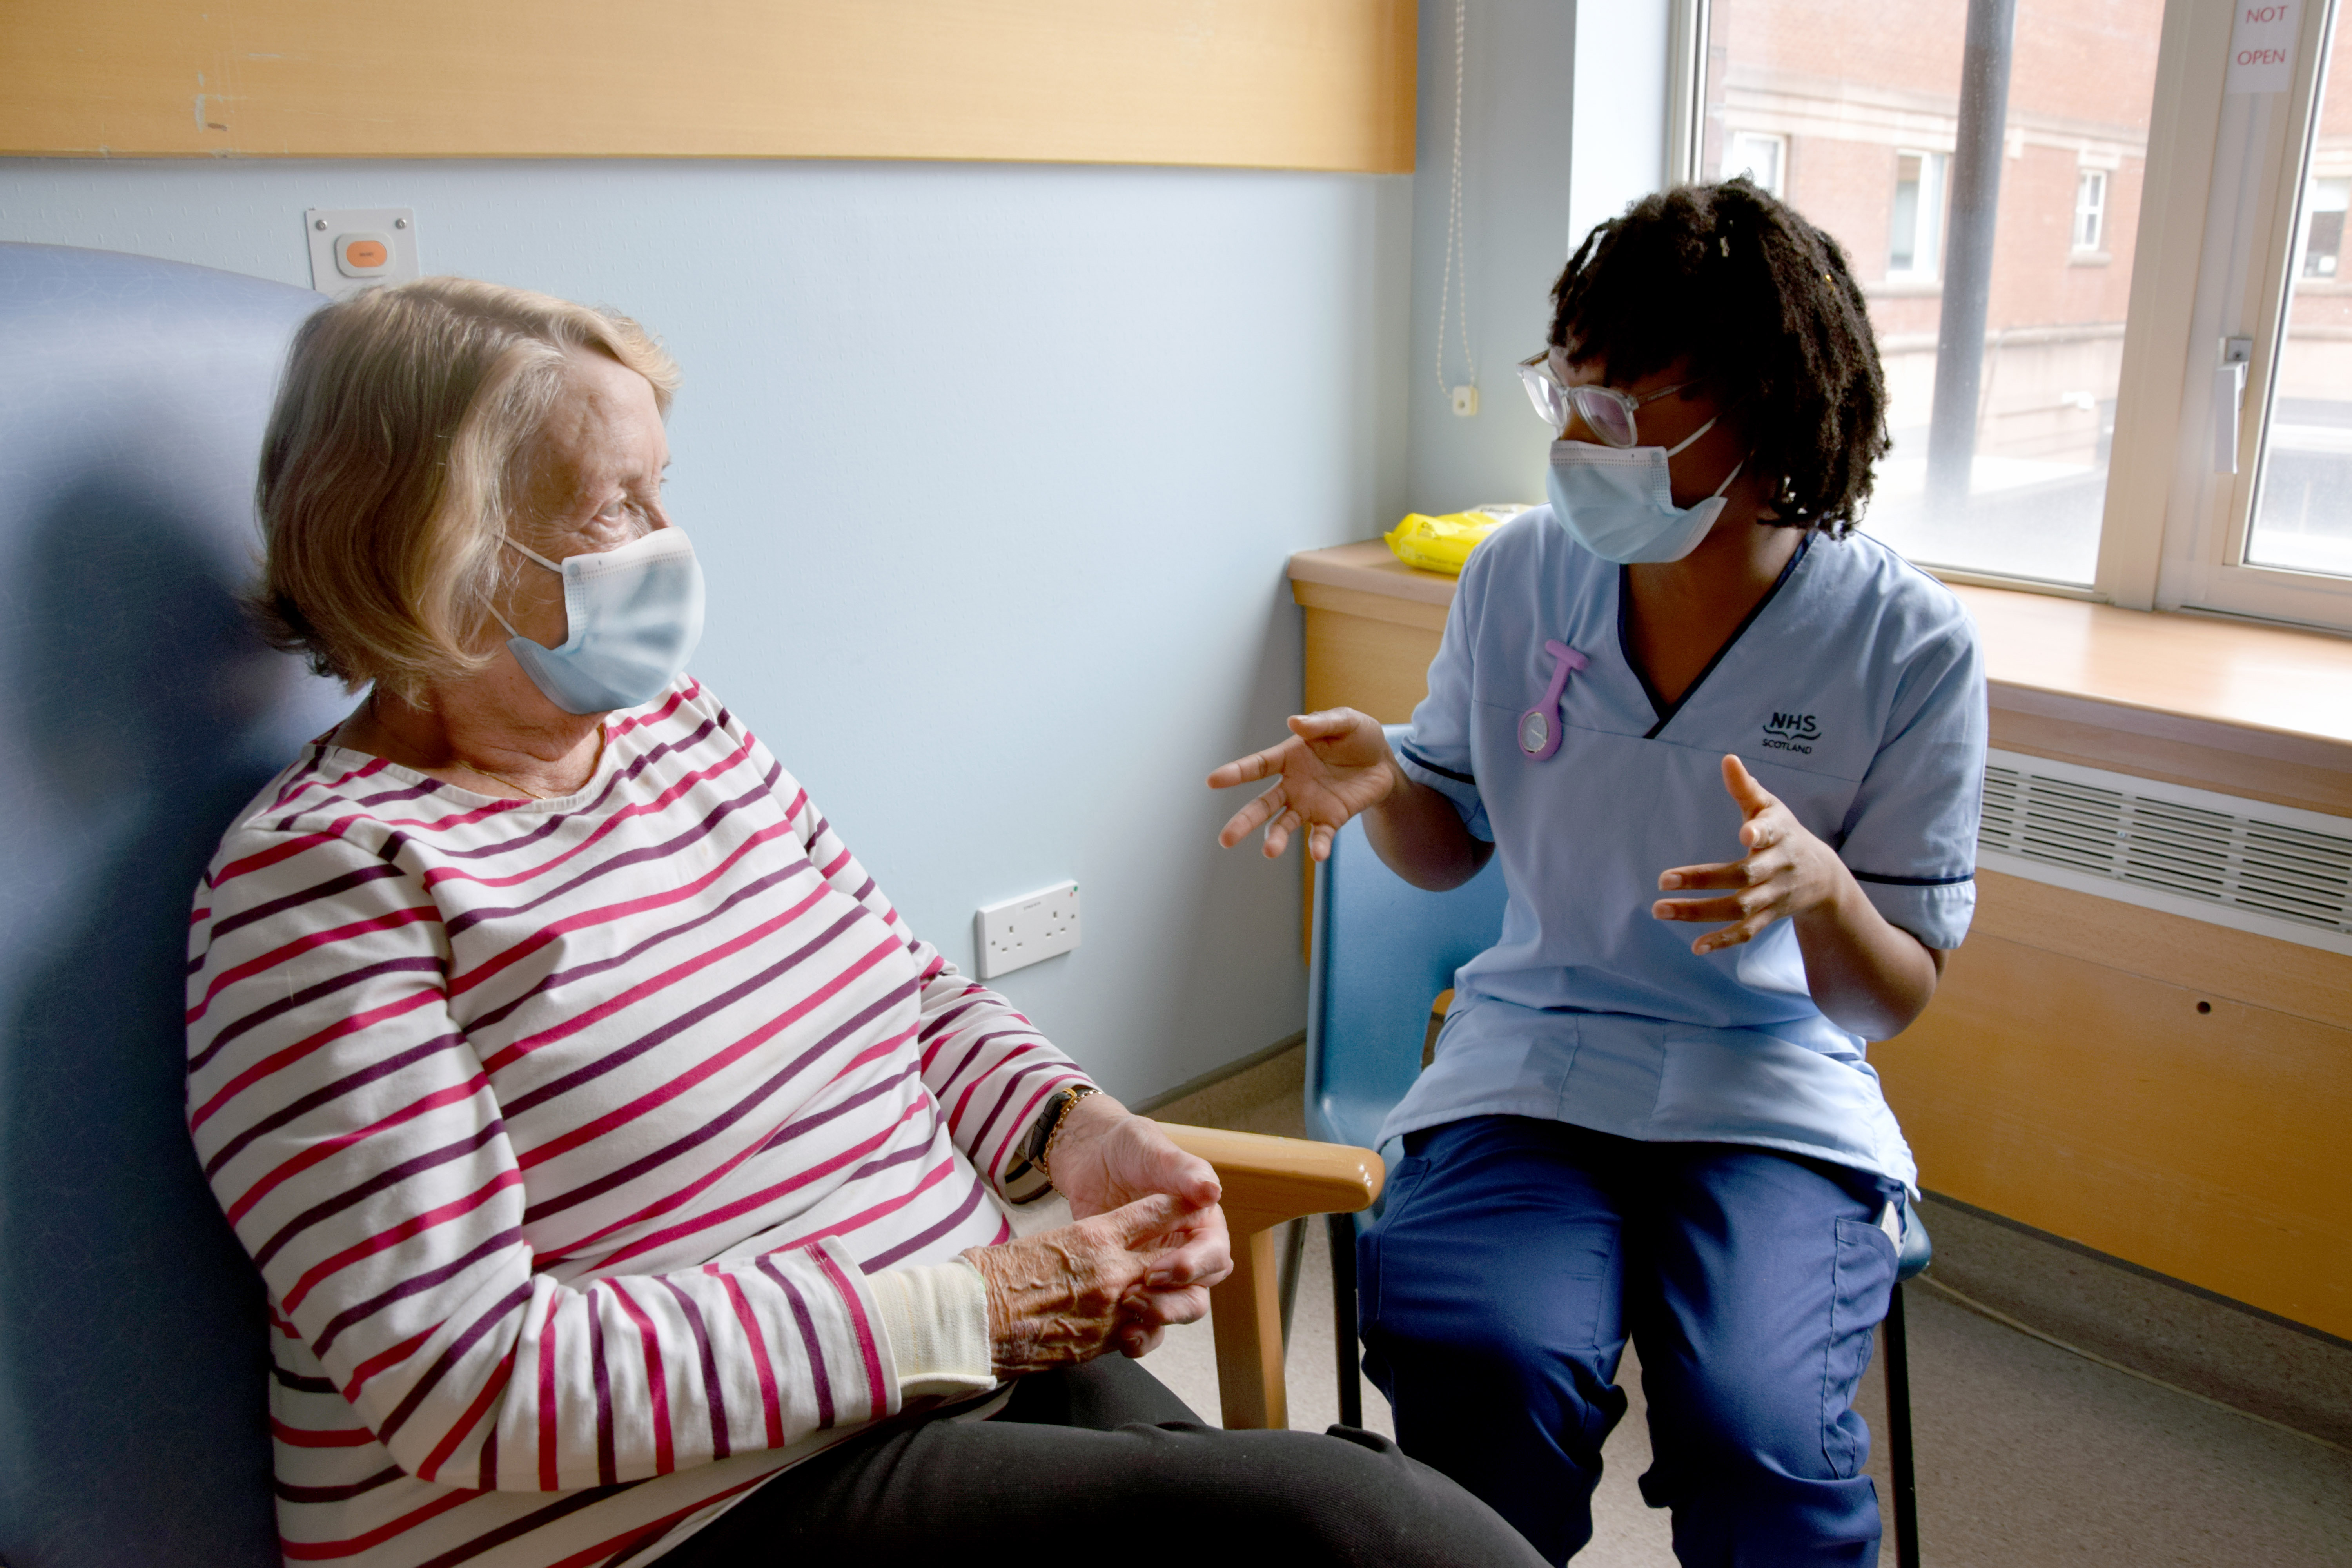 nurse_with_patient_19_brighter_and_mask.jpg